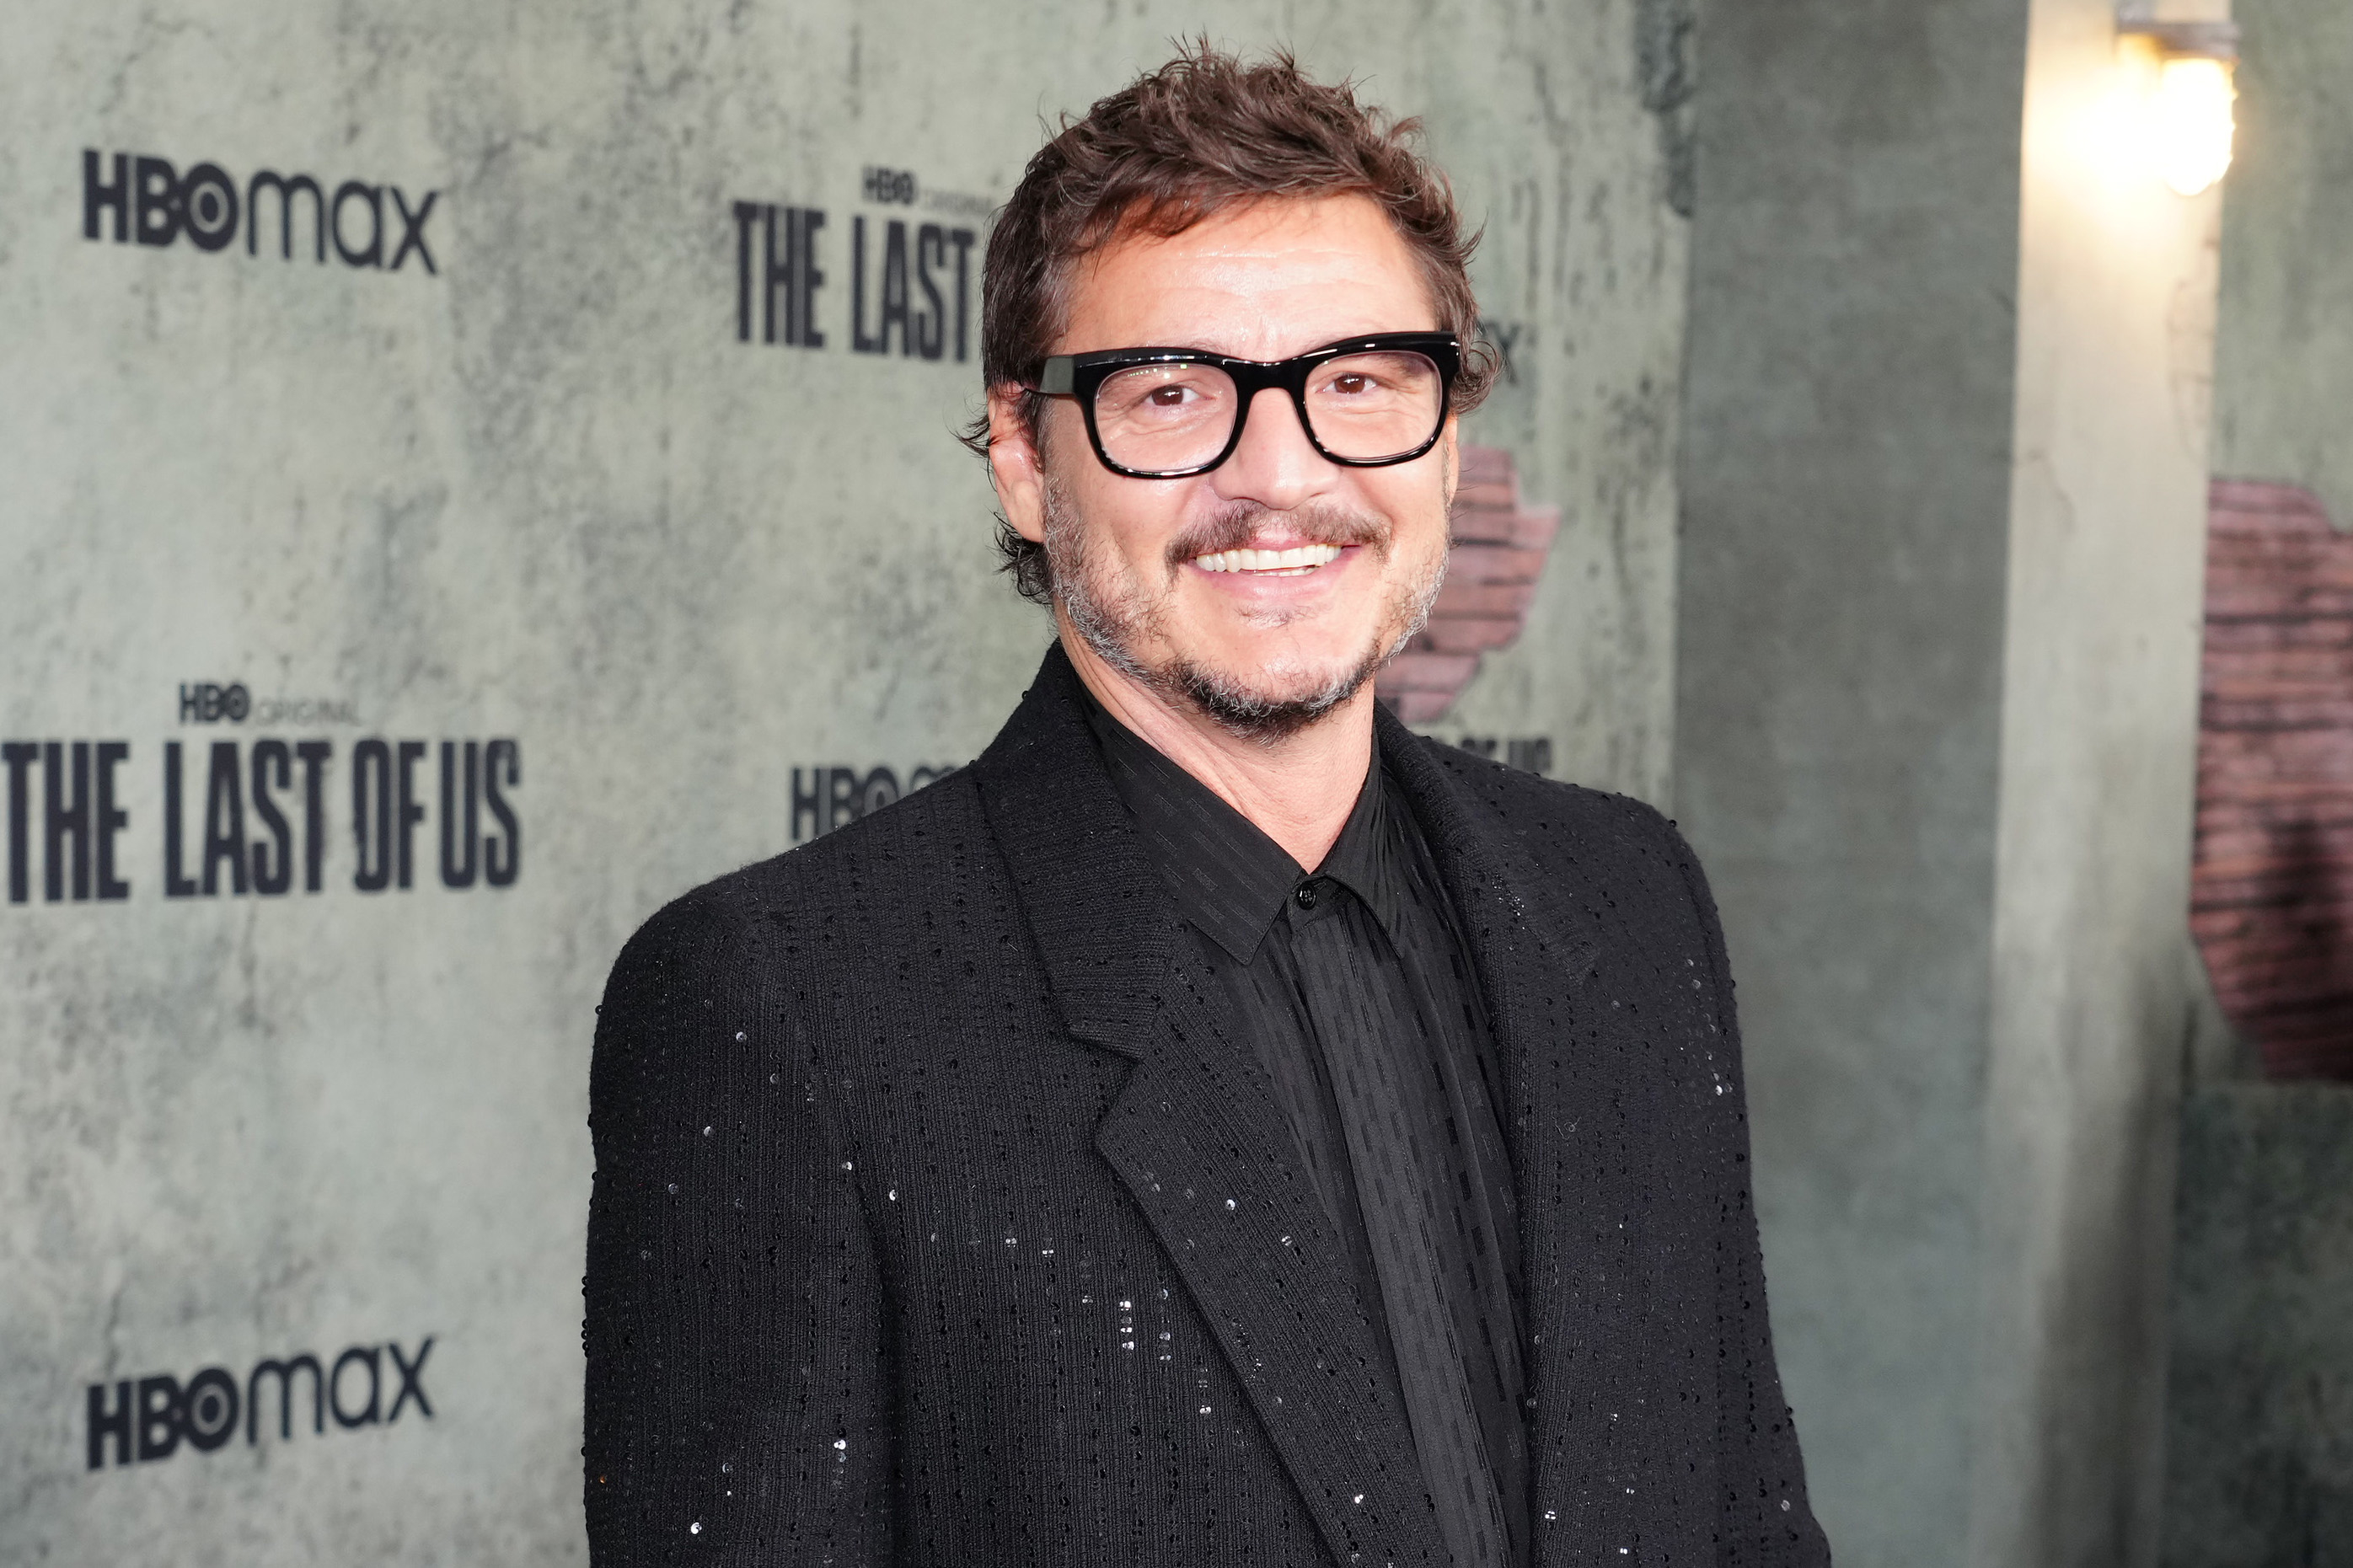 Pedro Pascal at the last of us event